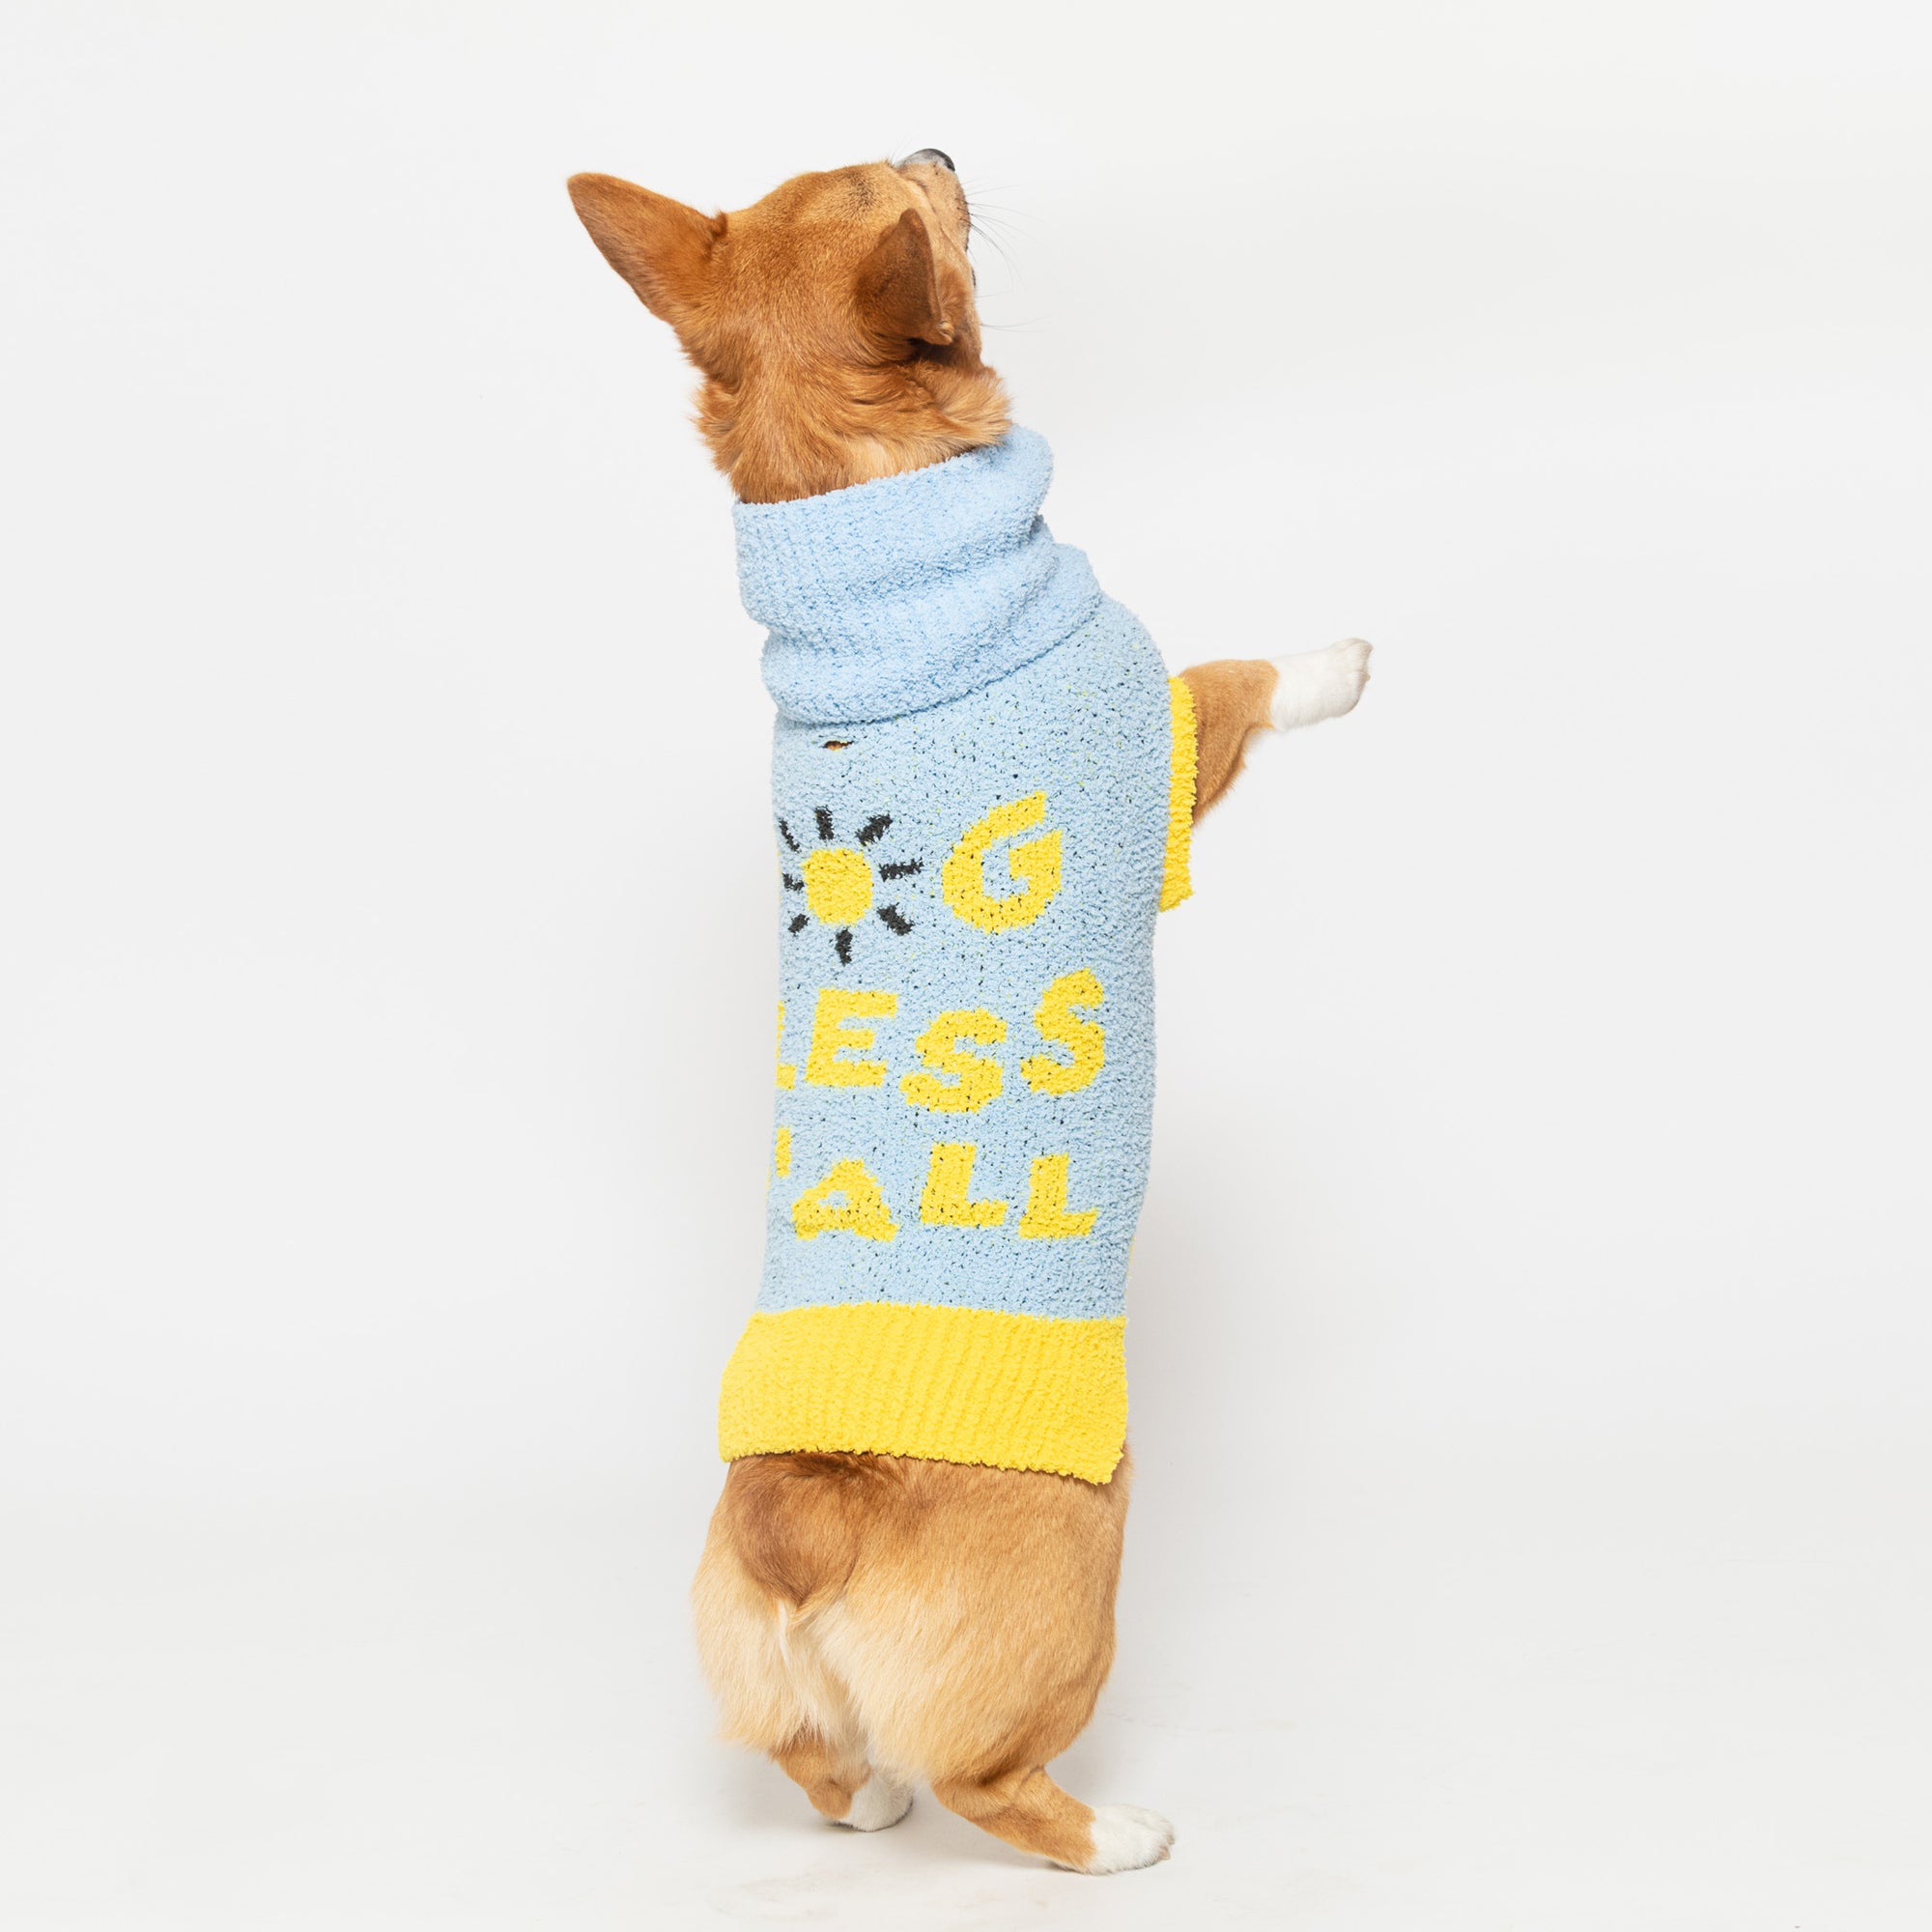 A Corgi in a "the furryfolks" sweater stands on hind legs, sweater reads "DOG BLESS Y'ALL" with a bee design, against a white background.